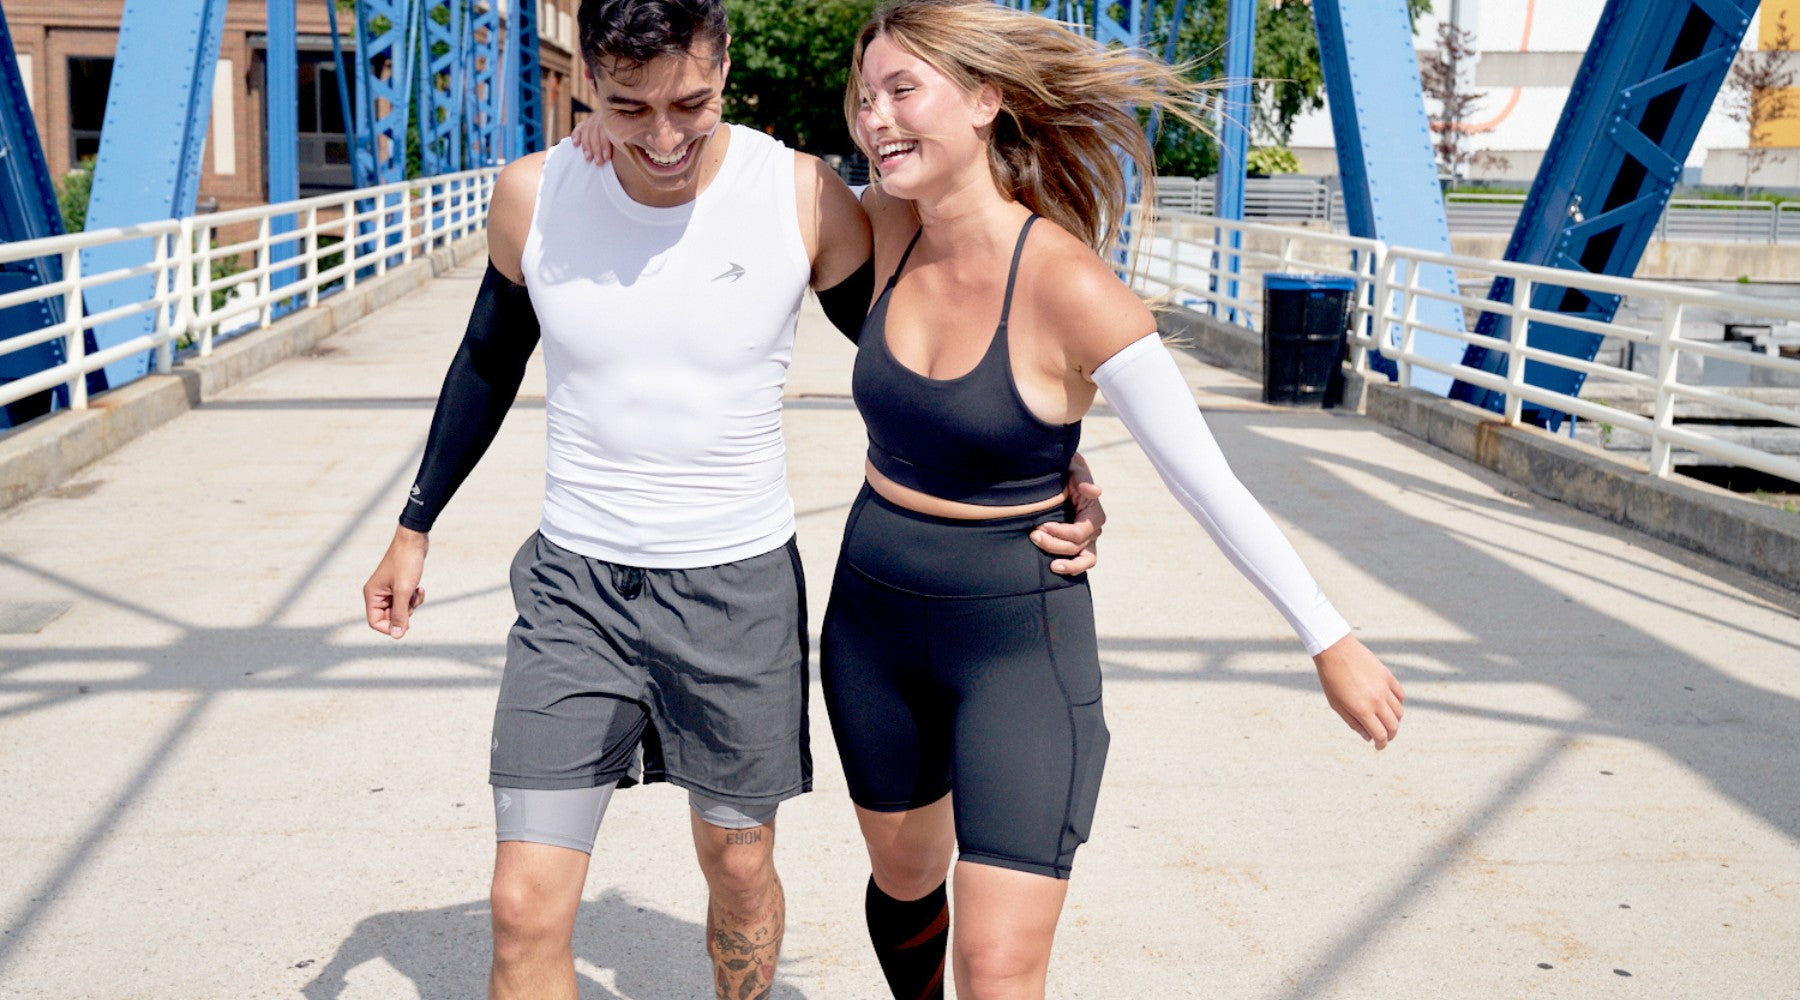 Guy and girl walking wearing compression shorts, tops and arm sleeves.